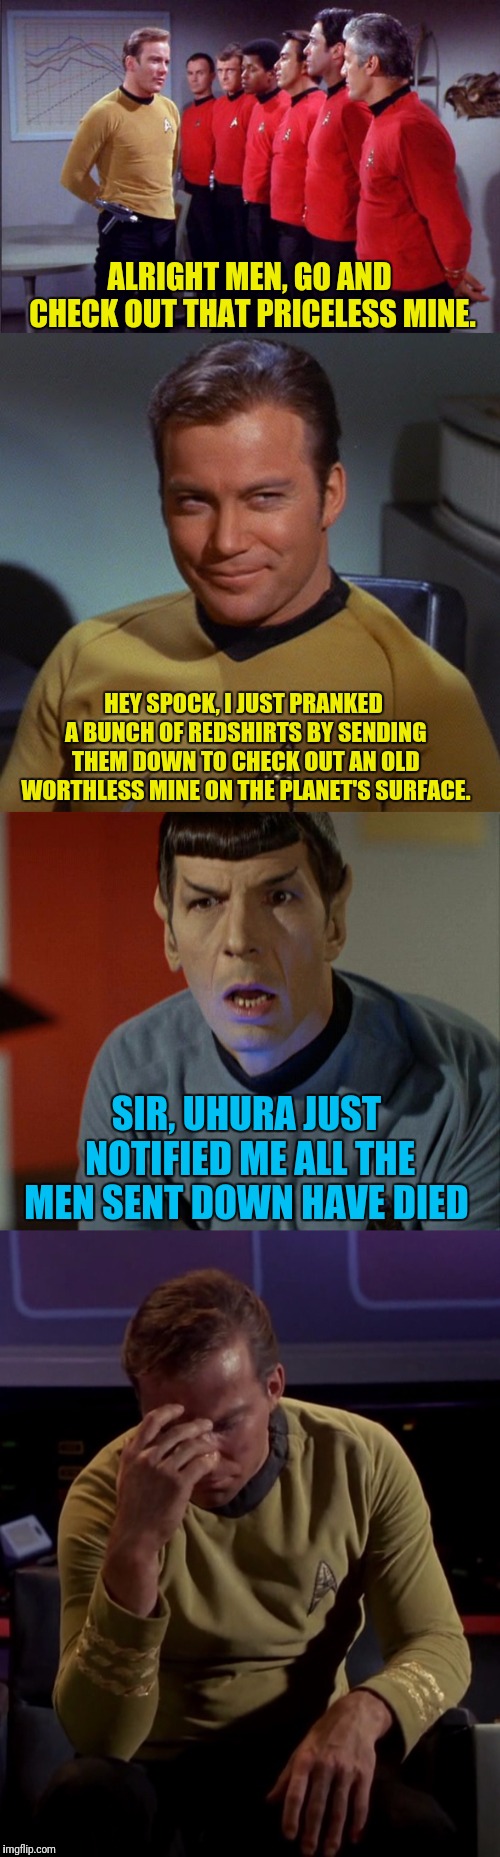 Kirk Pranks Redshirts | ALRIGHT MEN, GO AND CHECK OUT THAT PRICELESS MINE. HEY SPOCK, I JUST PRANKED A BUNCH OF REDSHIRTS BY SENDING THEM DOWN TO CHECK OUT AN OLD WORTHLESS MINE ON THE PLANET'S SURFACE. SIR, UHURA JUST NOTIFIED ME ALL THE MEN SENT DOWN HAVE DIED | image tagged in redshirts,captain kirk,star trek,spock,pranks | made w/ Imgflip meme maker